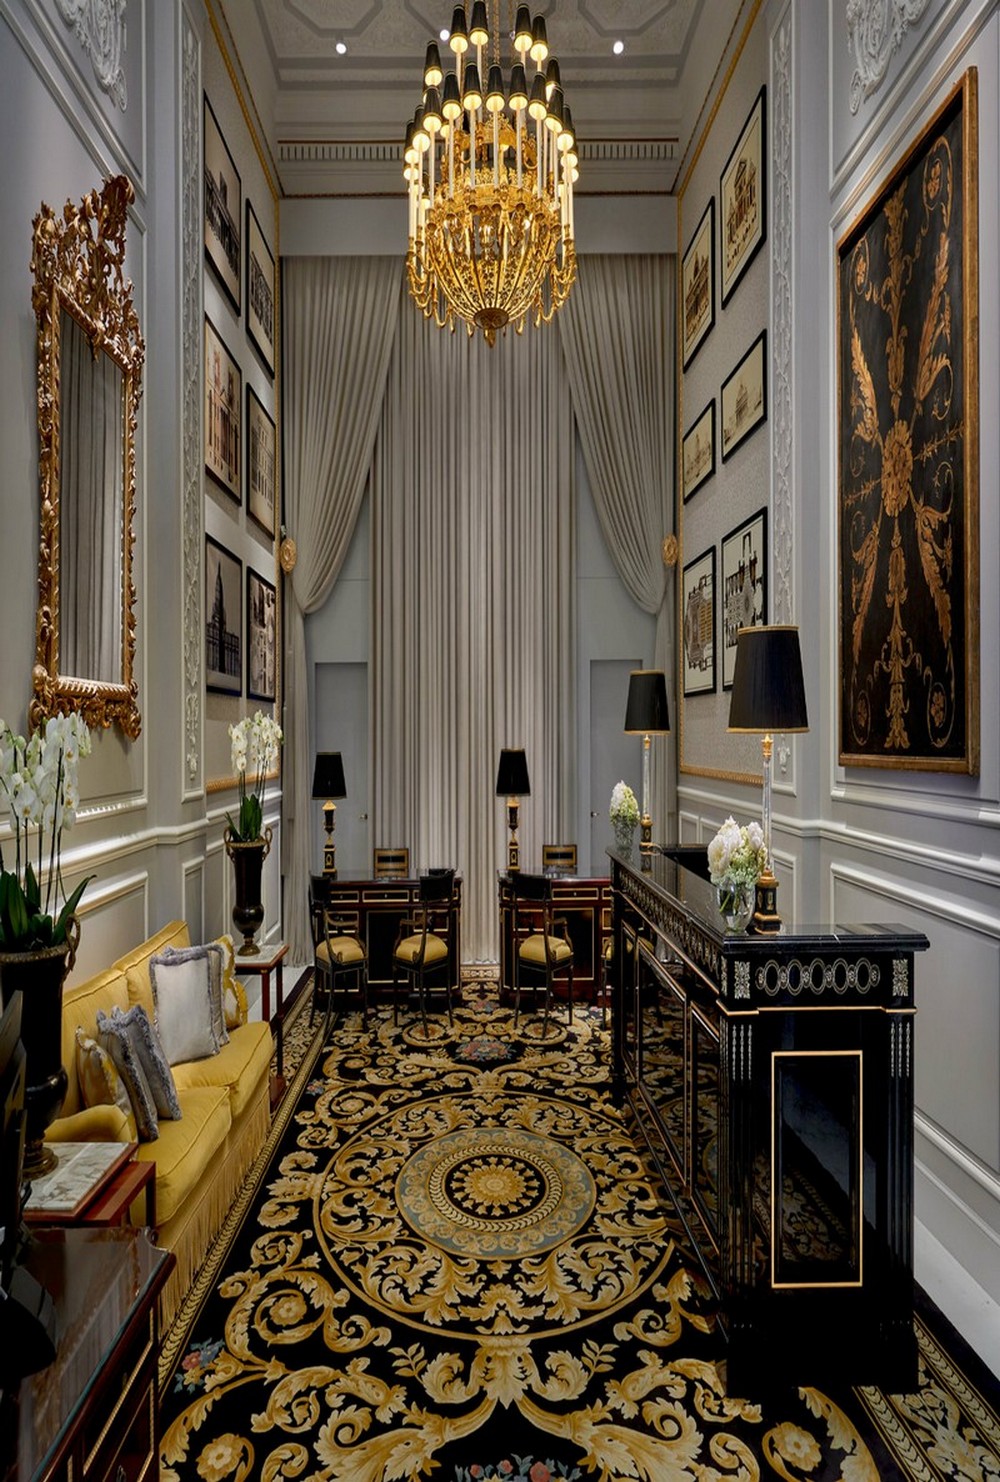 Top 100 Best Worldwide Interior Designers By CovetED Magazine - Part II